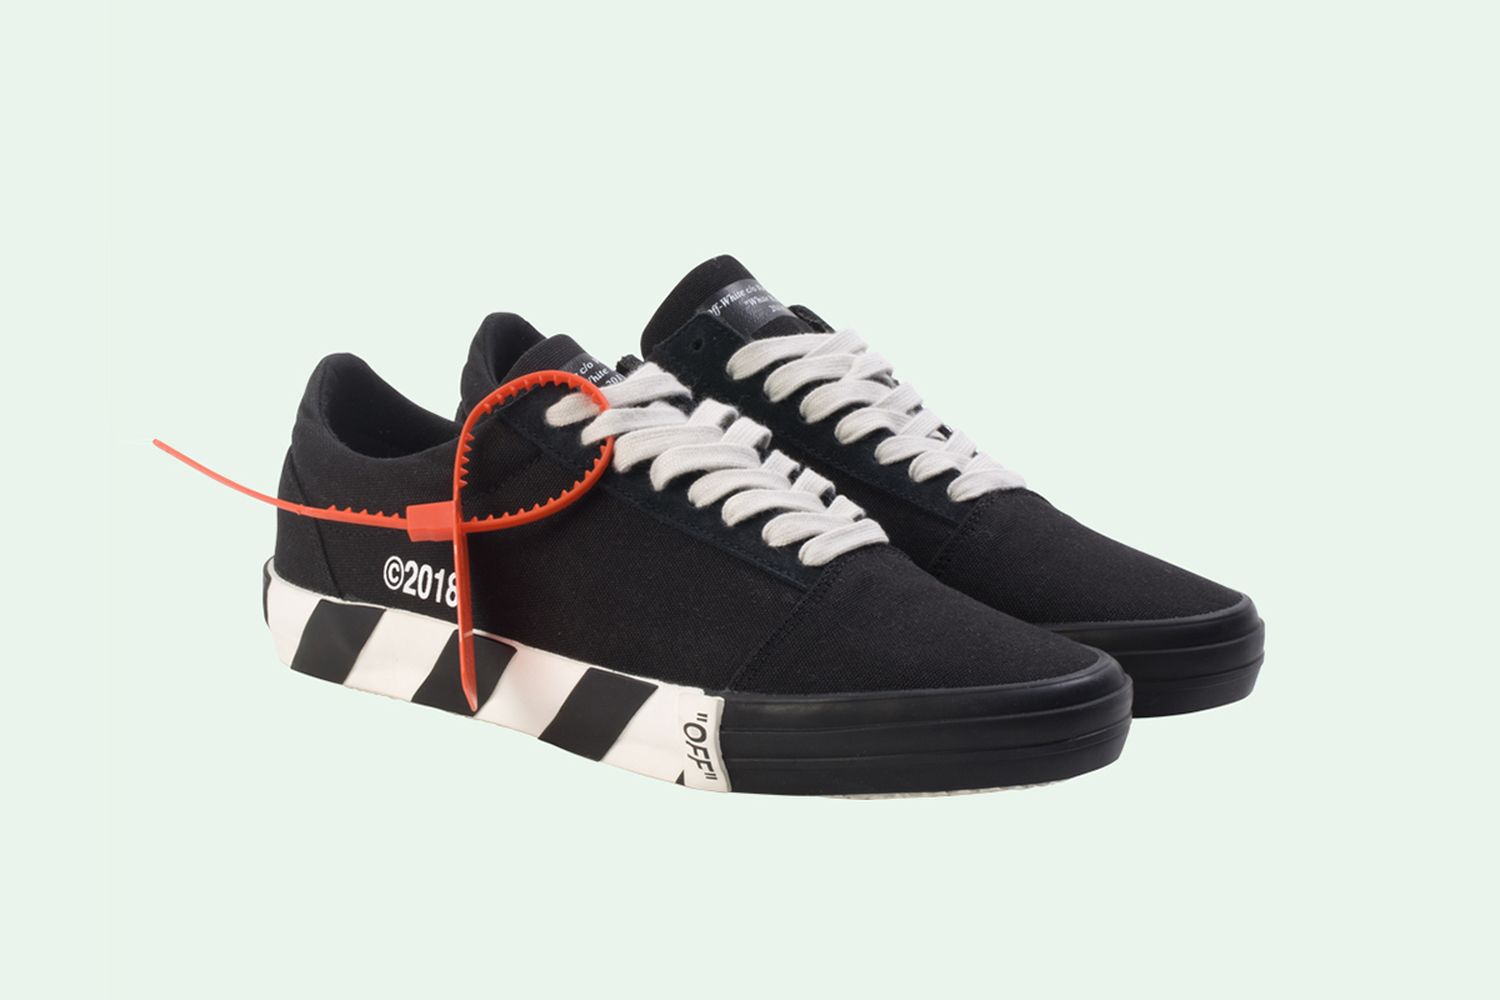 Brun i gang legering These OFF-WHITE Sneakers are the Closest Thing to a Vans Collab